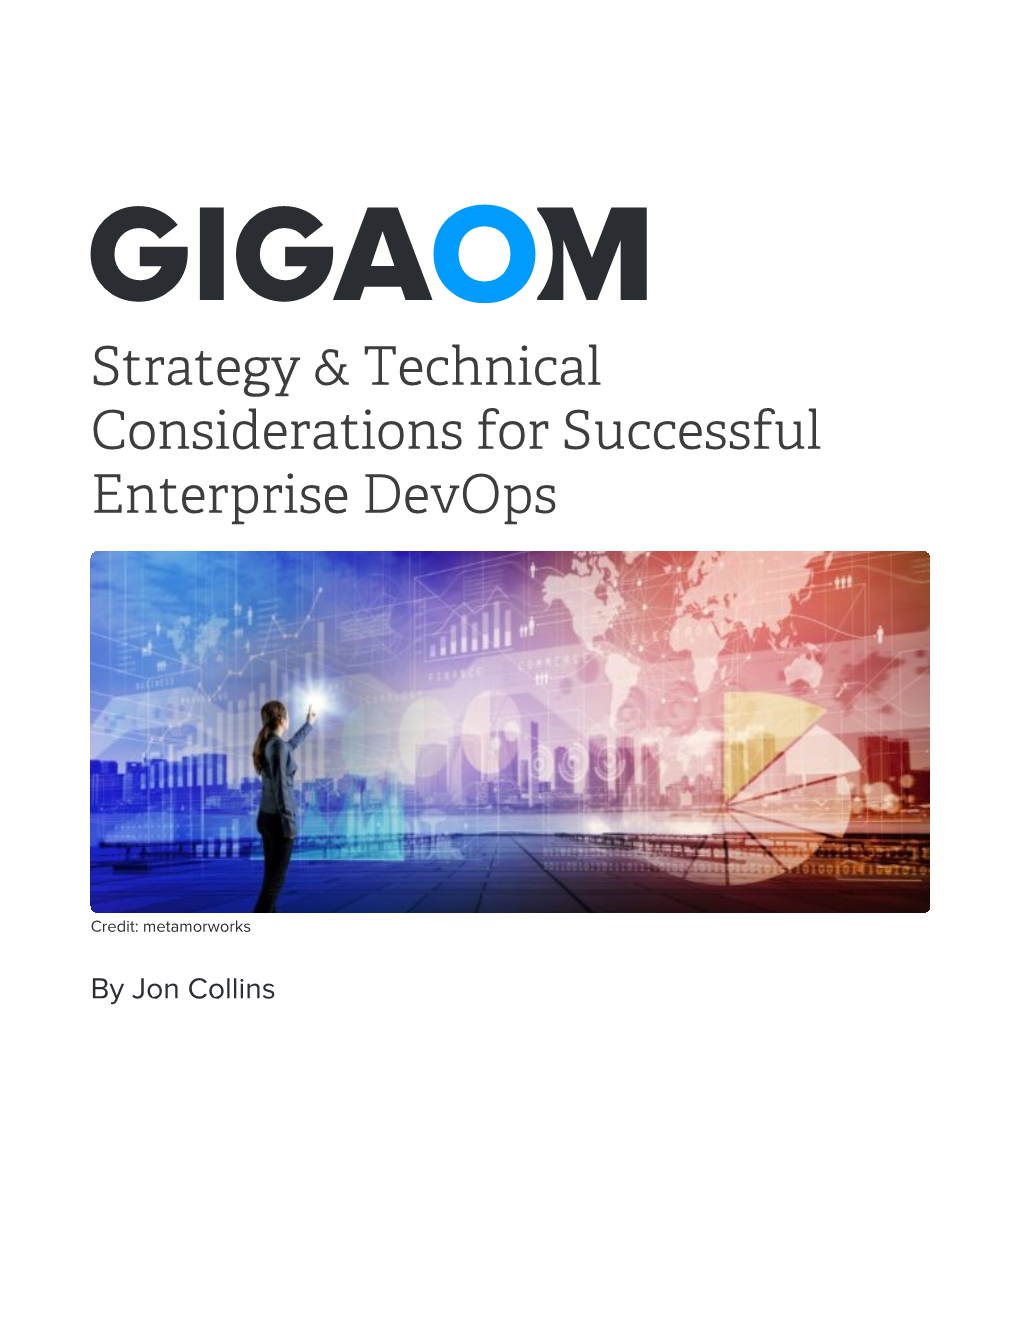 Strategy & Technical Considerations for Successful Enterprise Devops